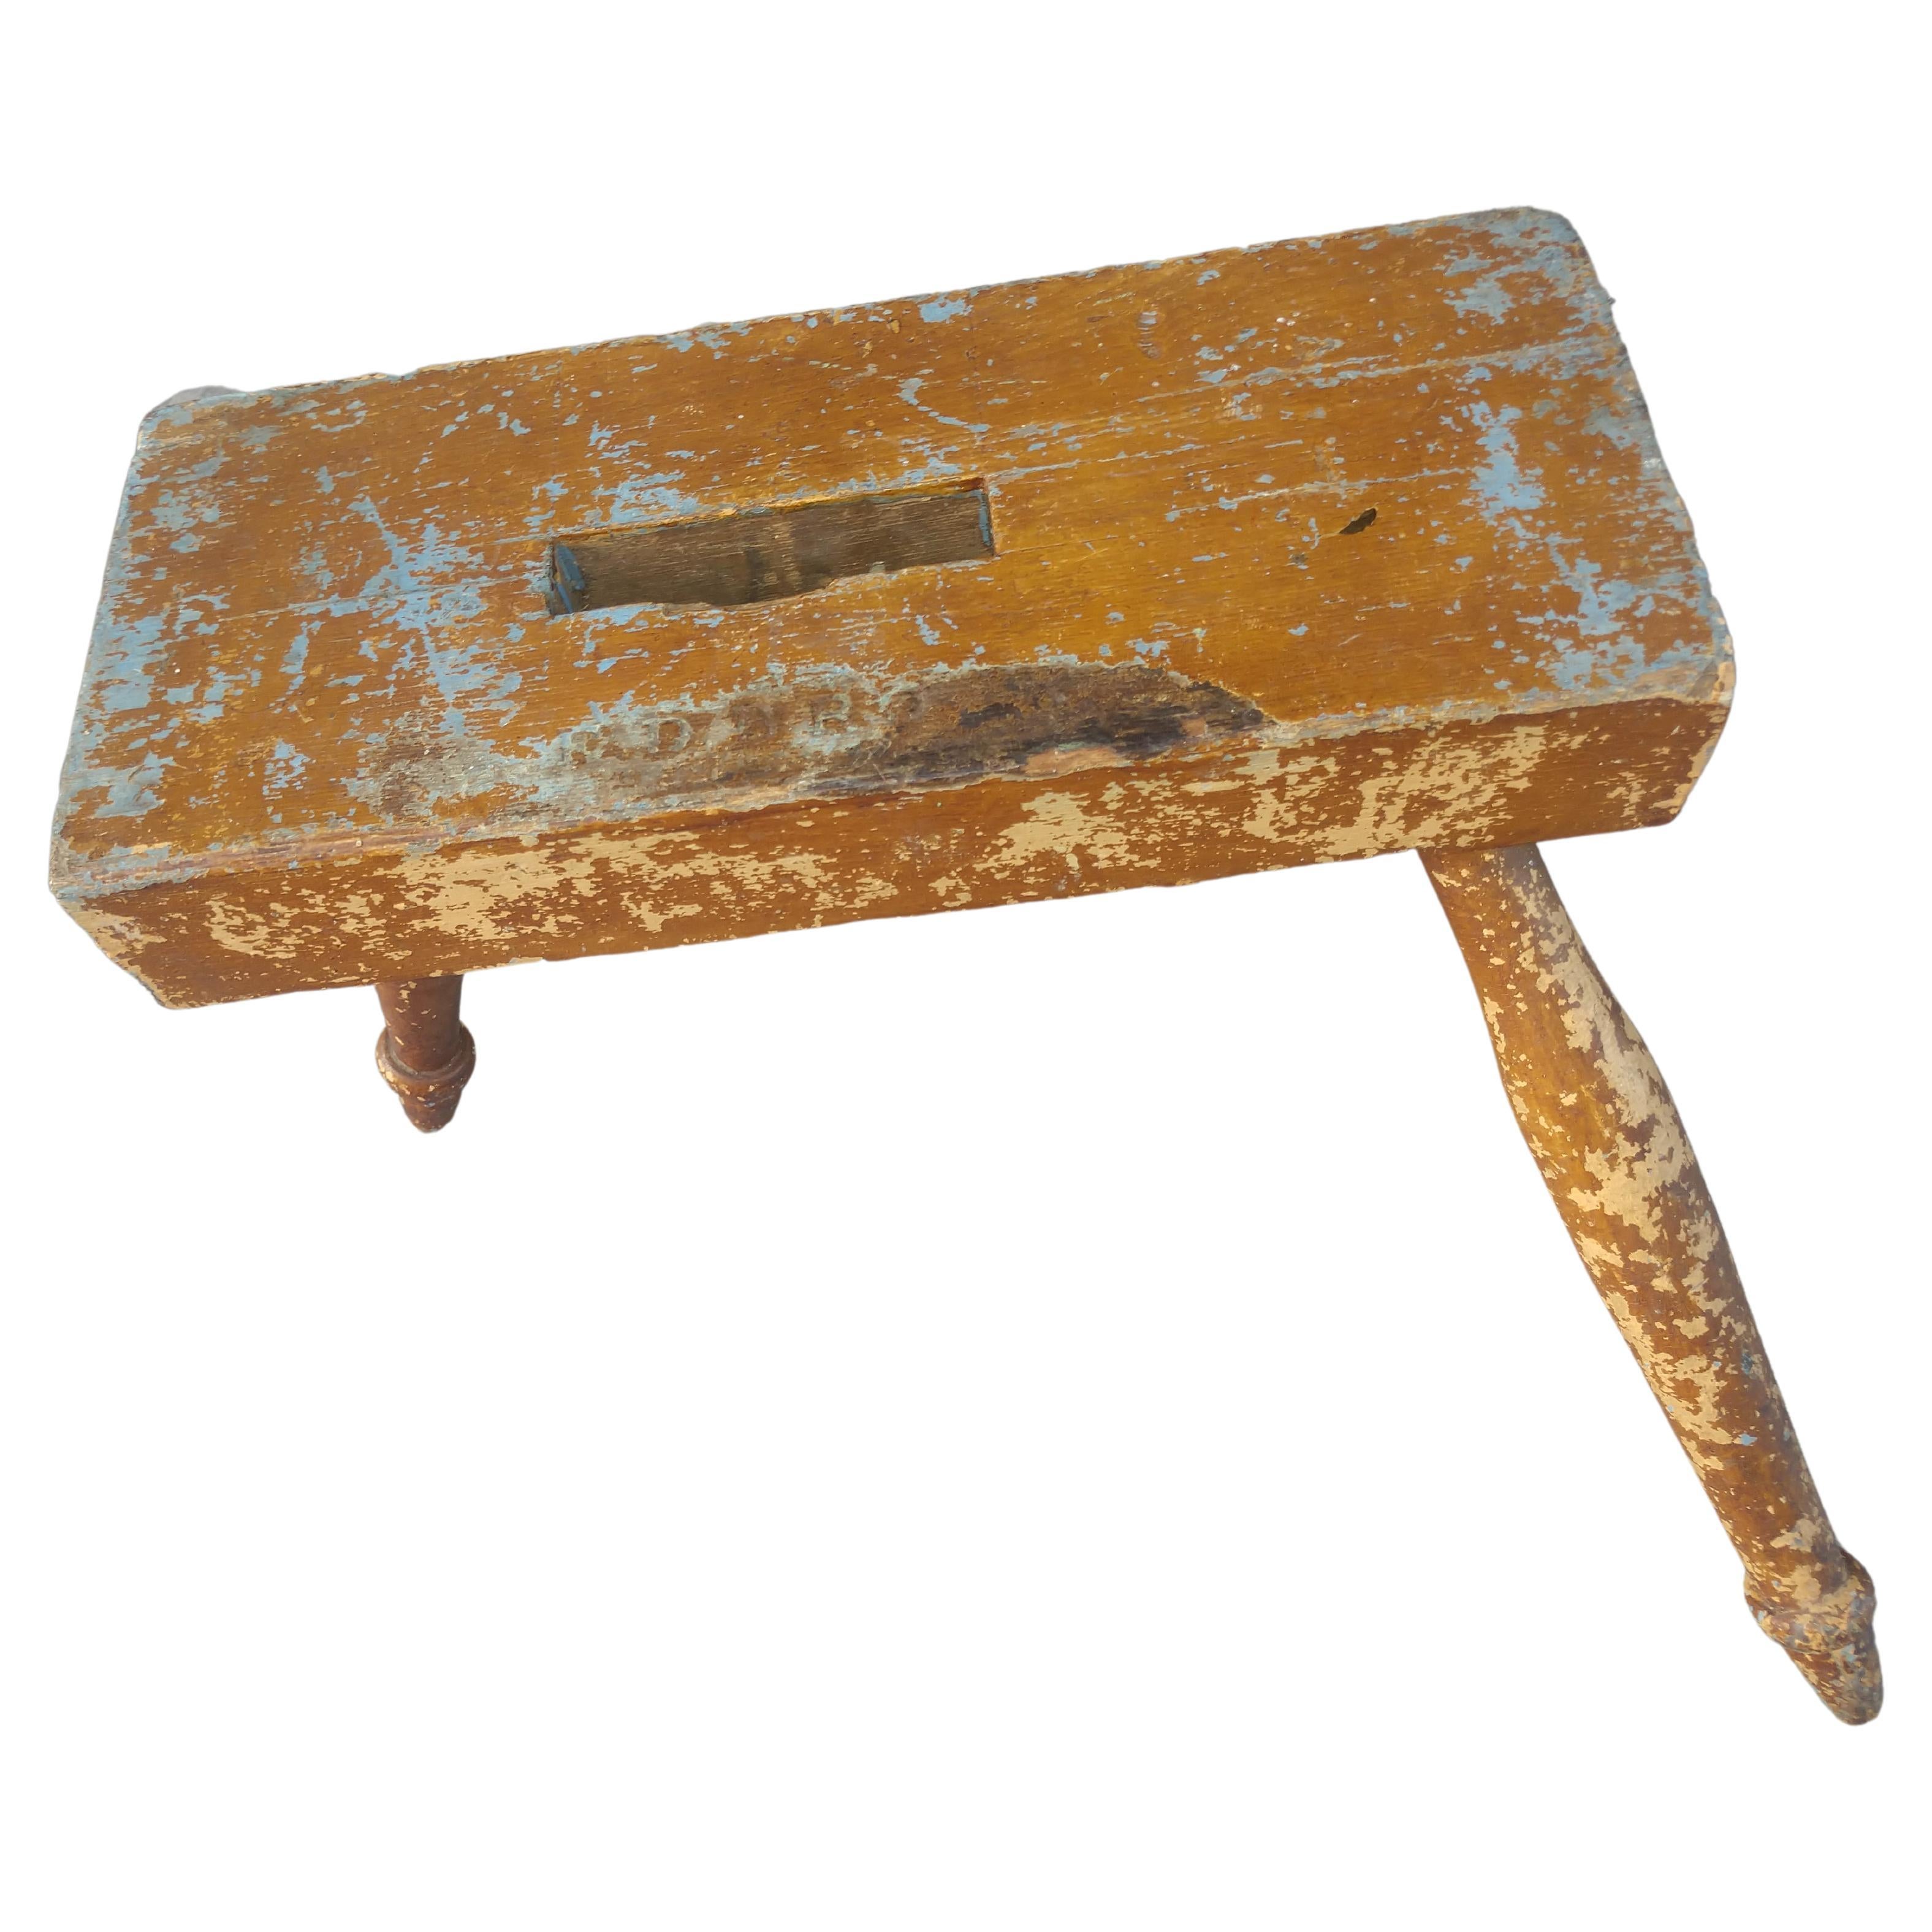 Sculptural 3 legged milking stool with multiple layers of paint. Rectangular top with a hand hole cut thru the center and supported by 3 turned legs. Their is a marking with letters on top but cannot decipher. In excellent vintage condition, very